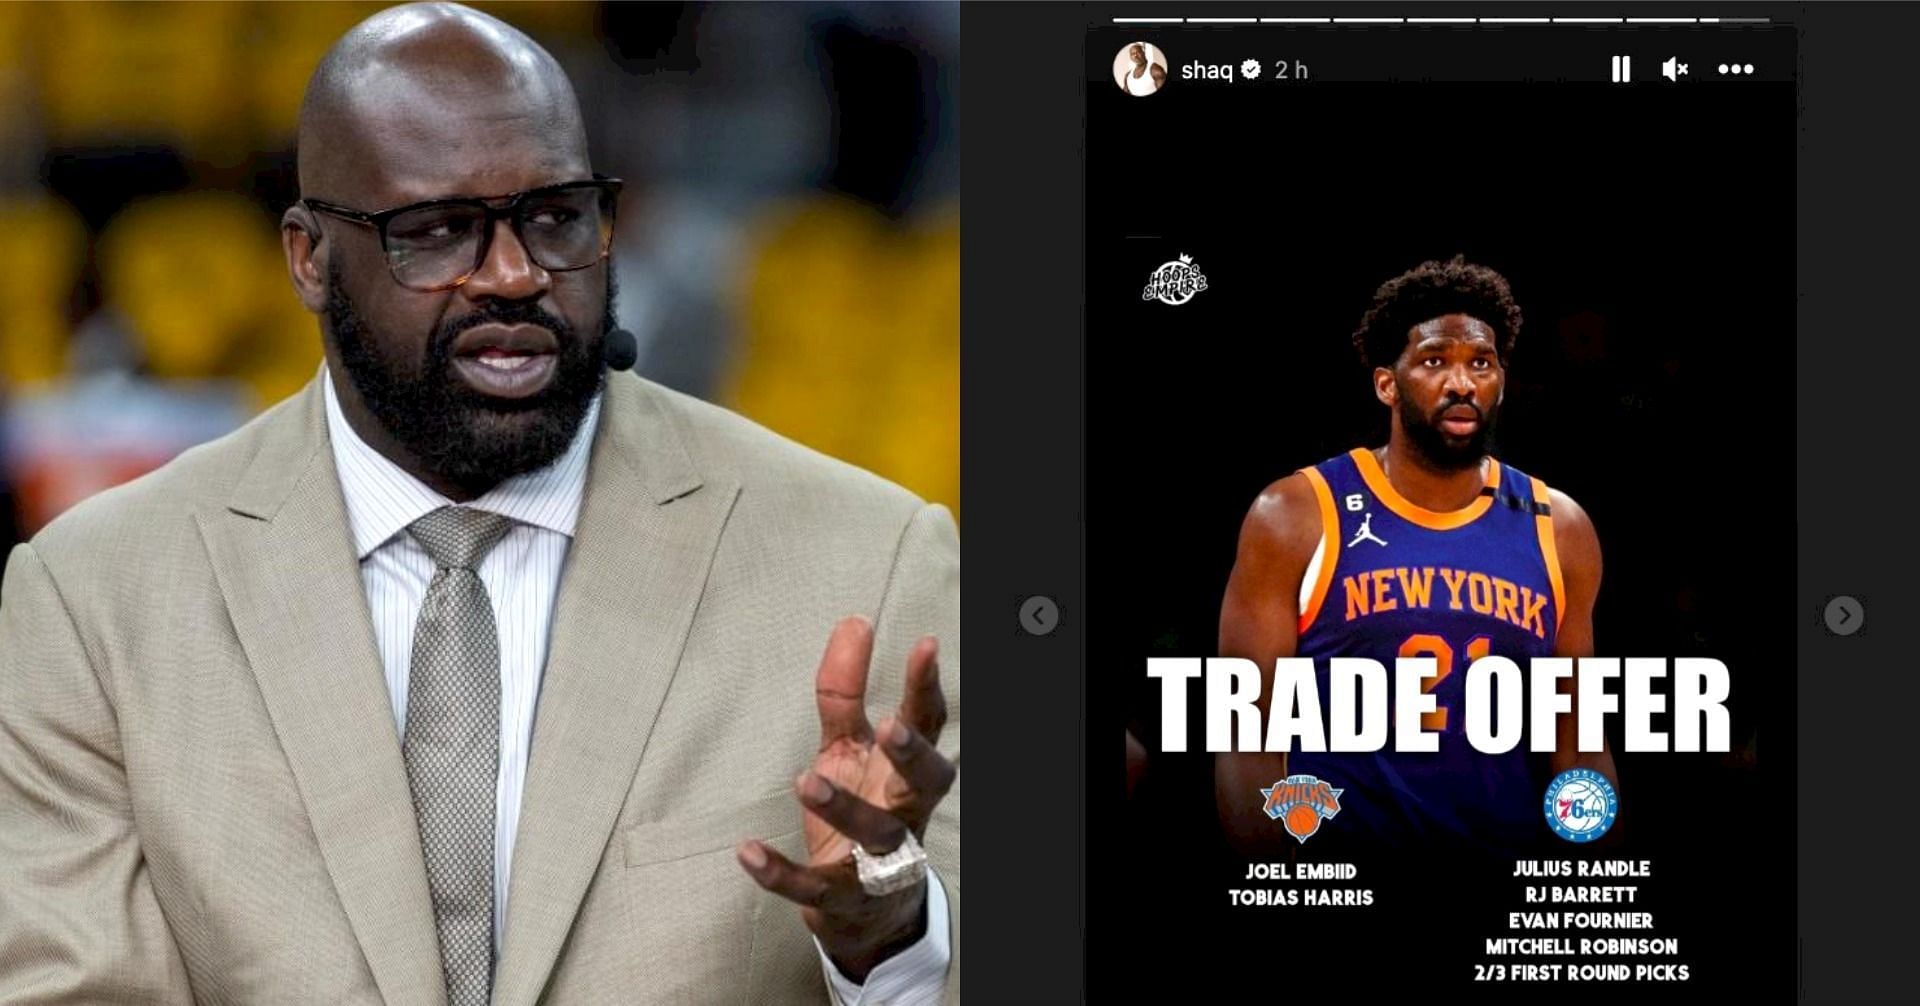 Shaquille O&rsquo;Neal supports Joel Embiid to Knicks rumors, seemingly agreeing with mock trade